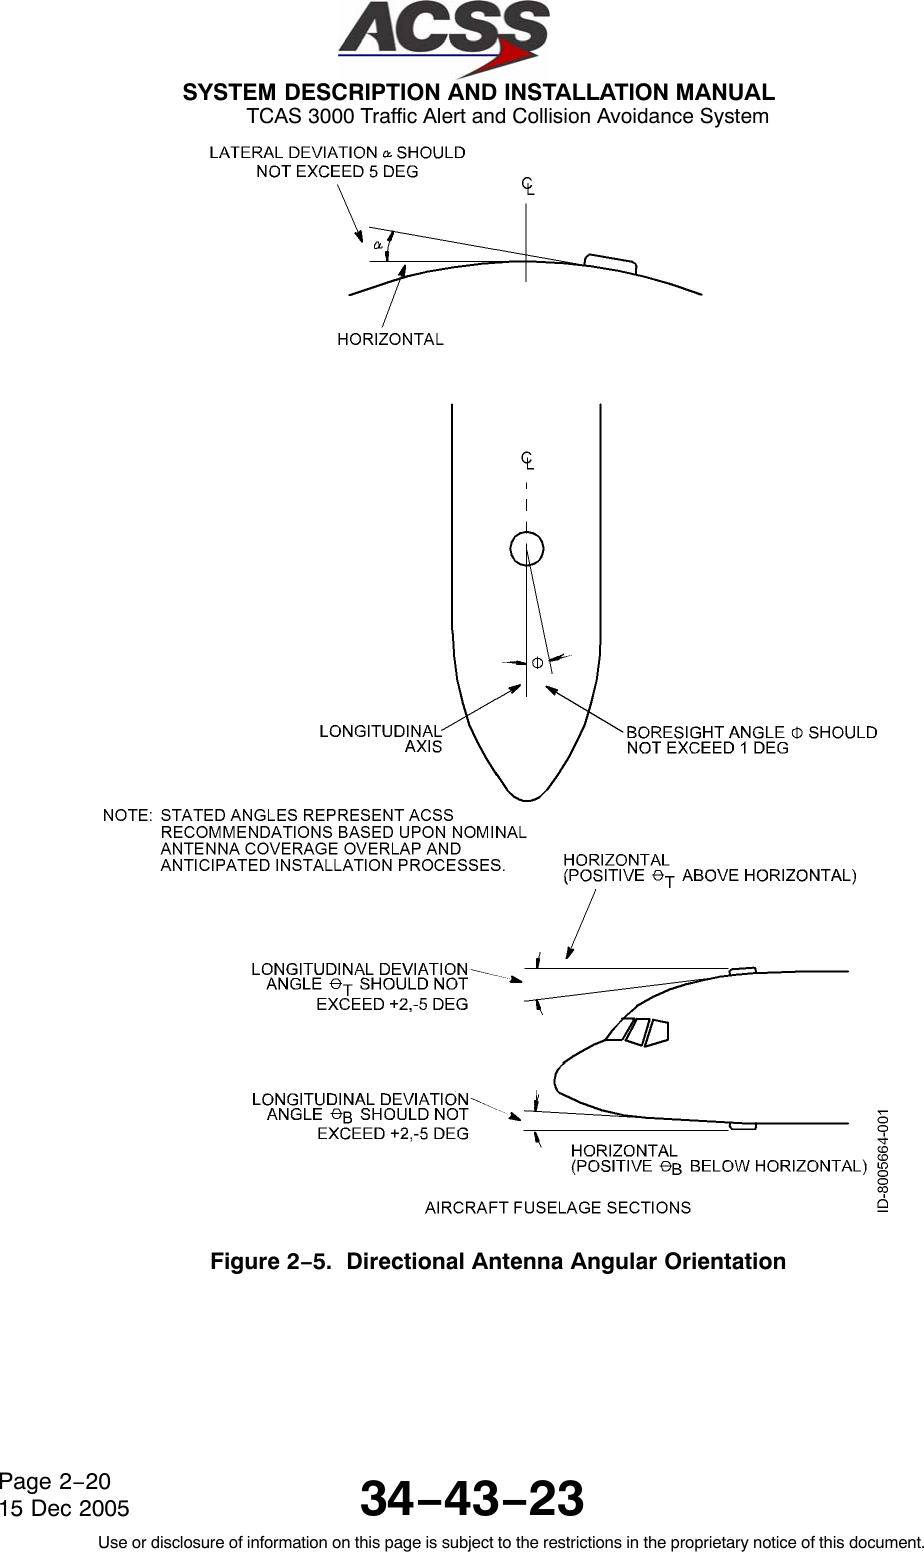  SYSTEM DESCRIPTION AND INSTALLATION MANUAL TCAS 3000 Traffic Alert and Collision Avoidance System34−43−23Use or disclosure of information on this page is subject to the restrictions in the proprietary notice of this document.Page 2−2015 Dec 2005Figure 2−5.  Directional Antenna Angular Orientation